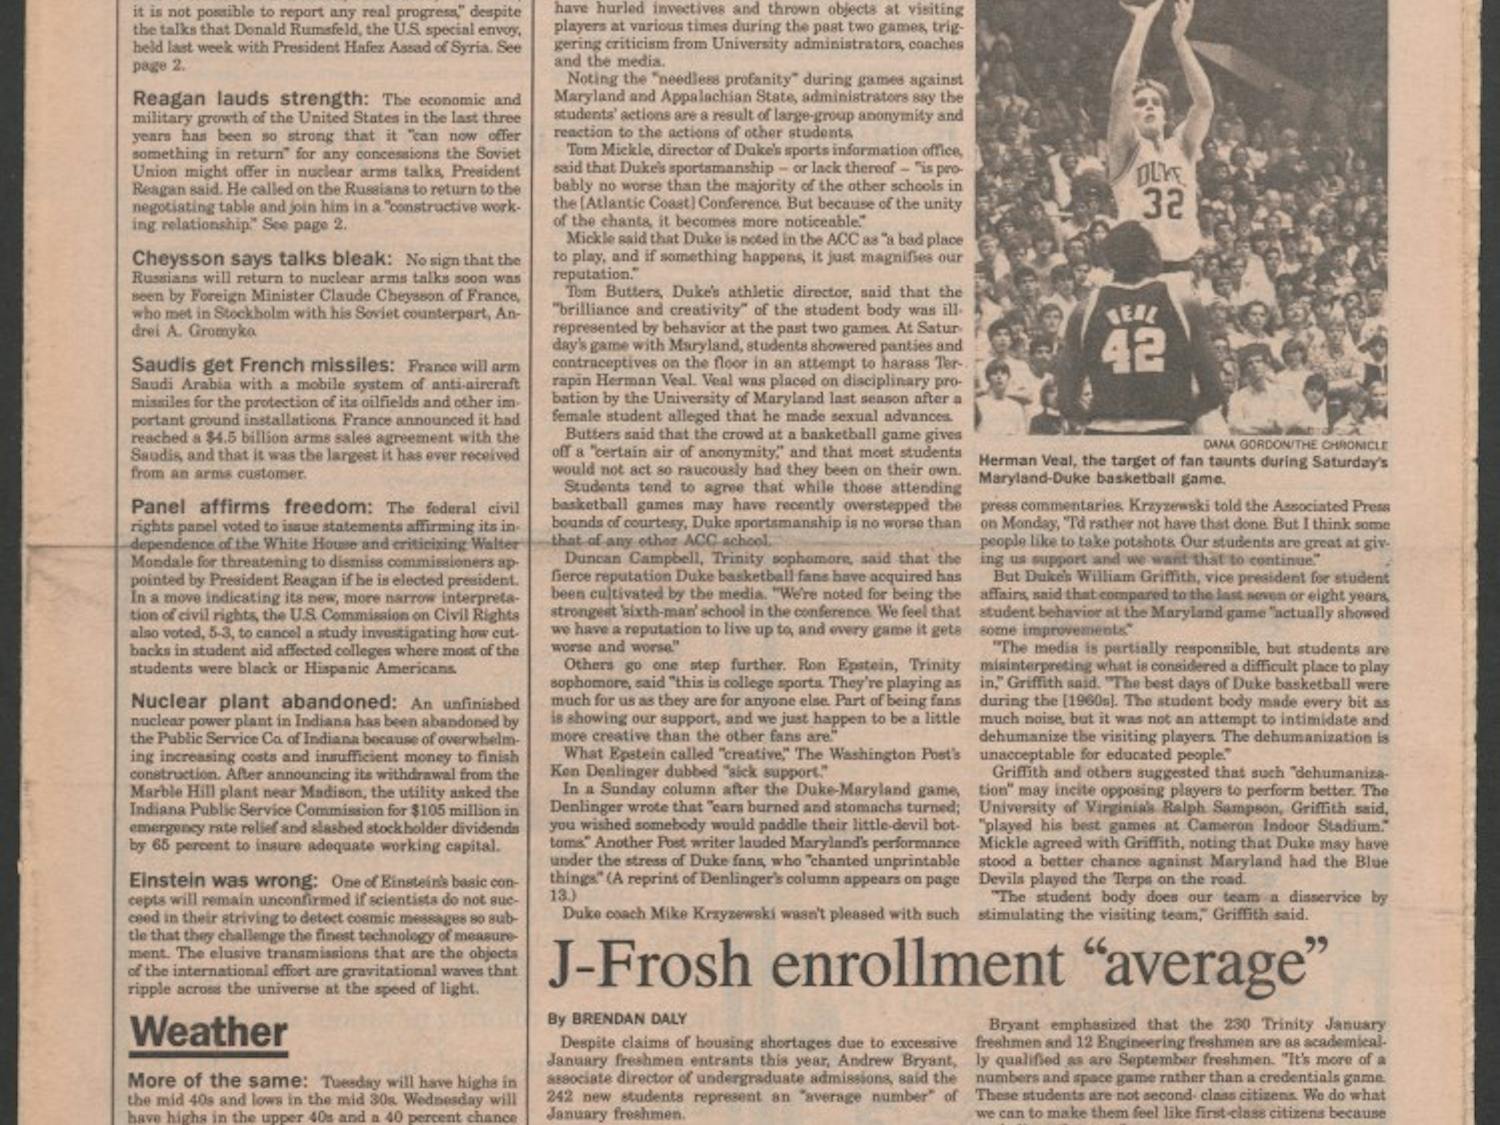 The media did not take kindly to a particularly obscene taunt from the Cameron Crazies in 1984.